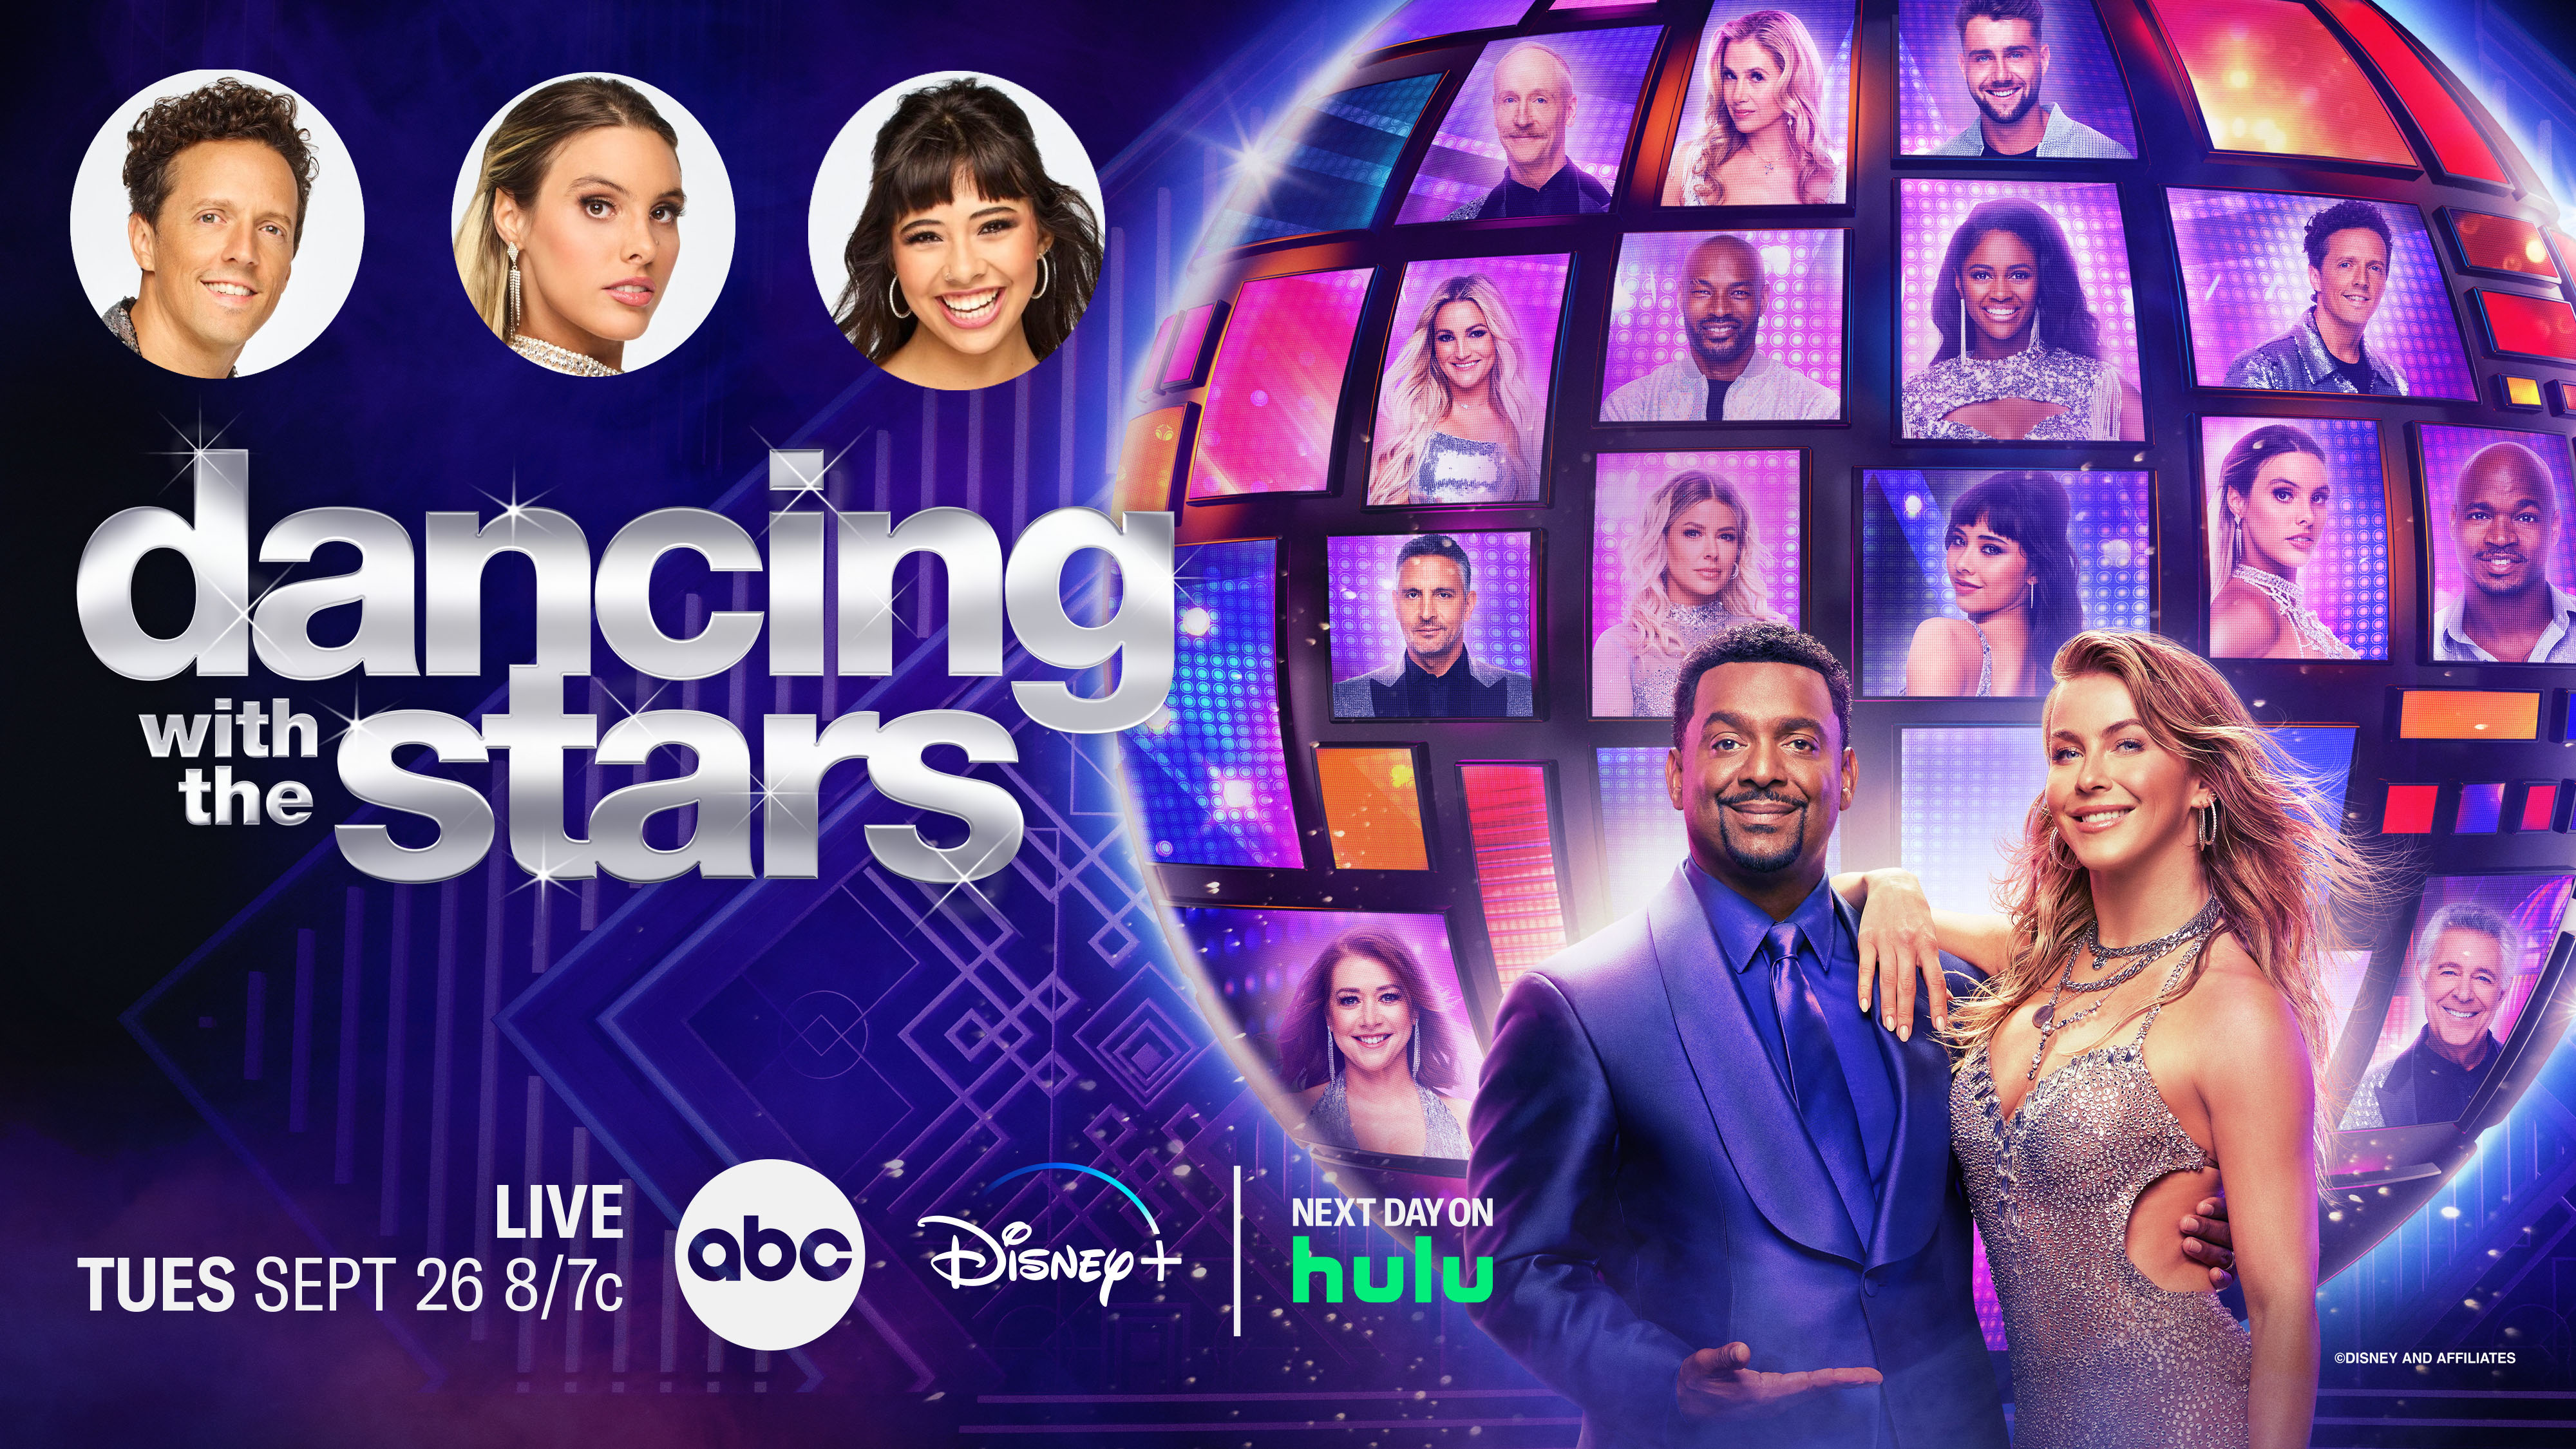 SEE IT: New Cast And Matchups For Season 32 Of ‘Dancing With The Stars’ Revealed